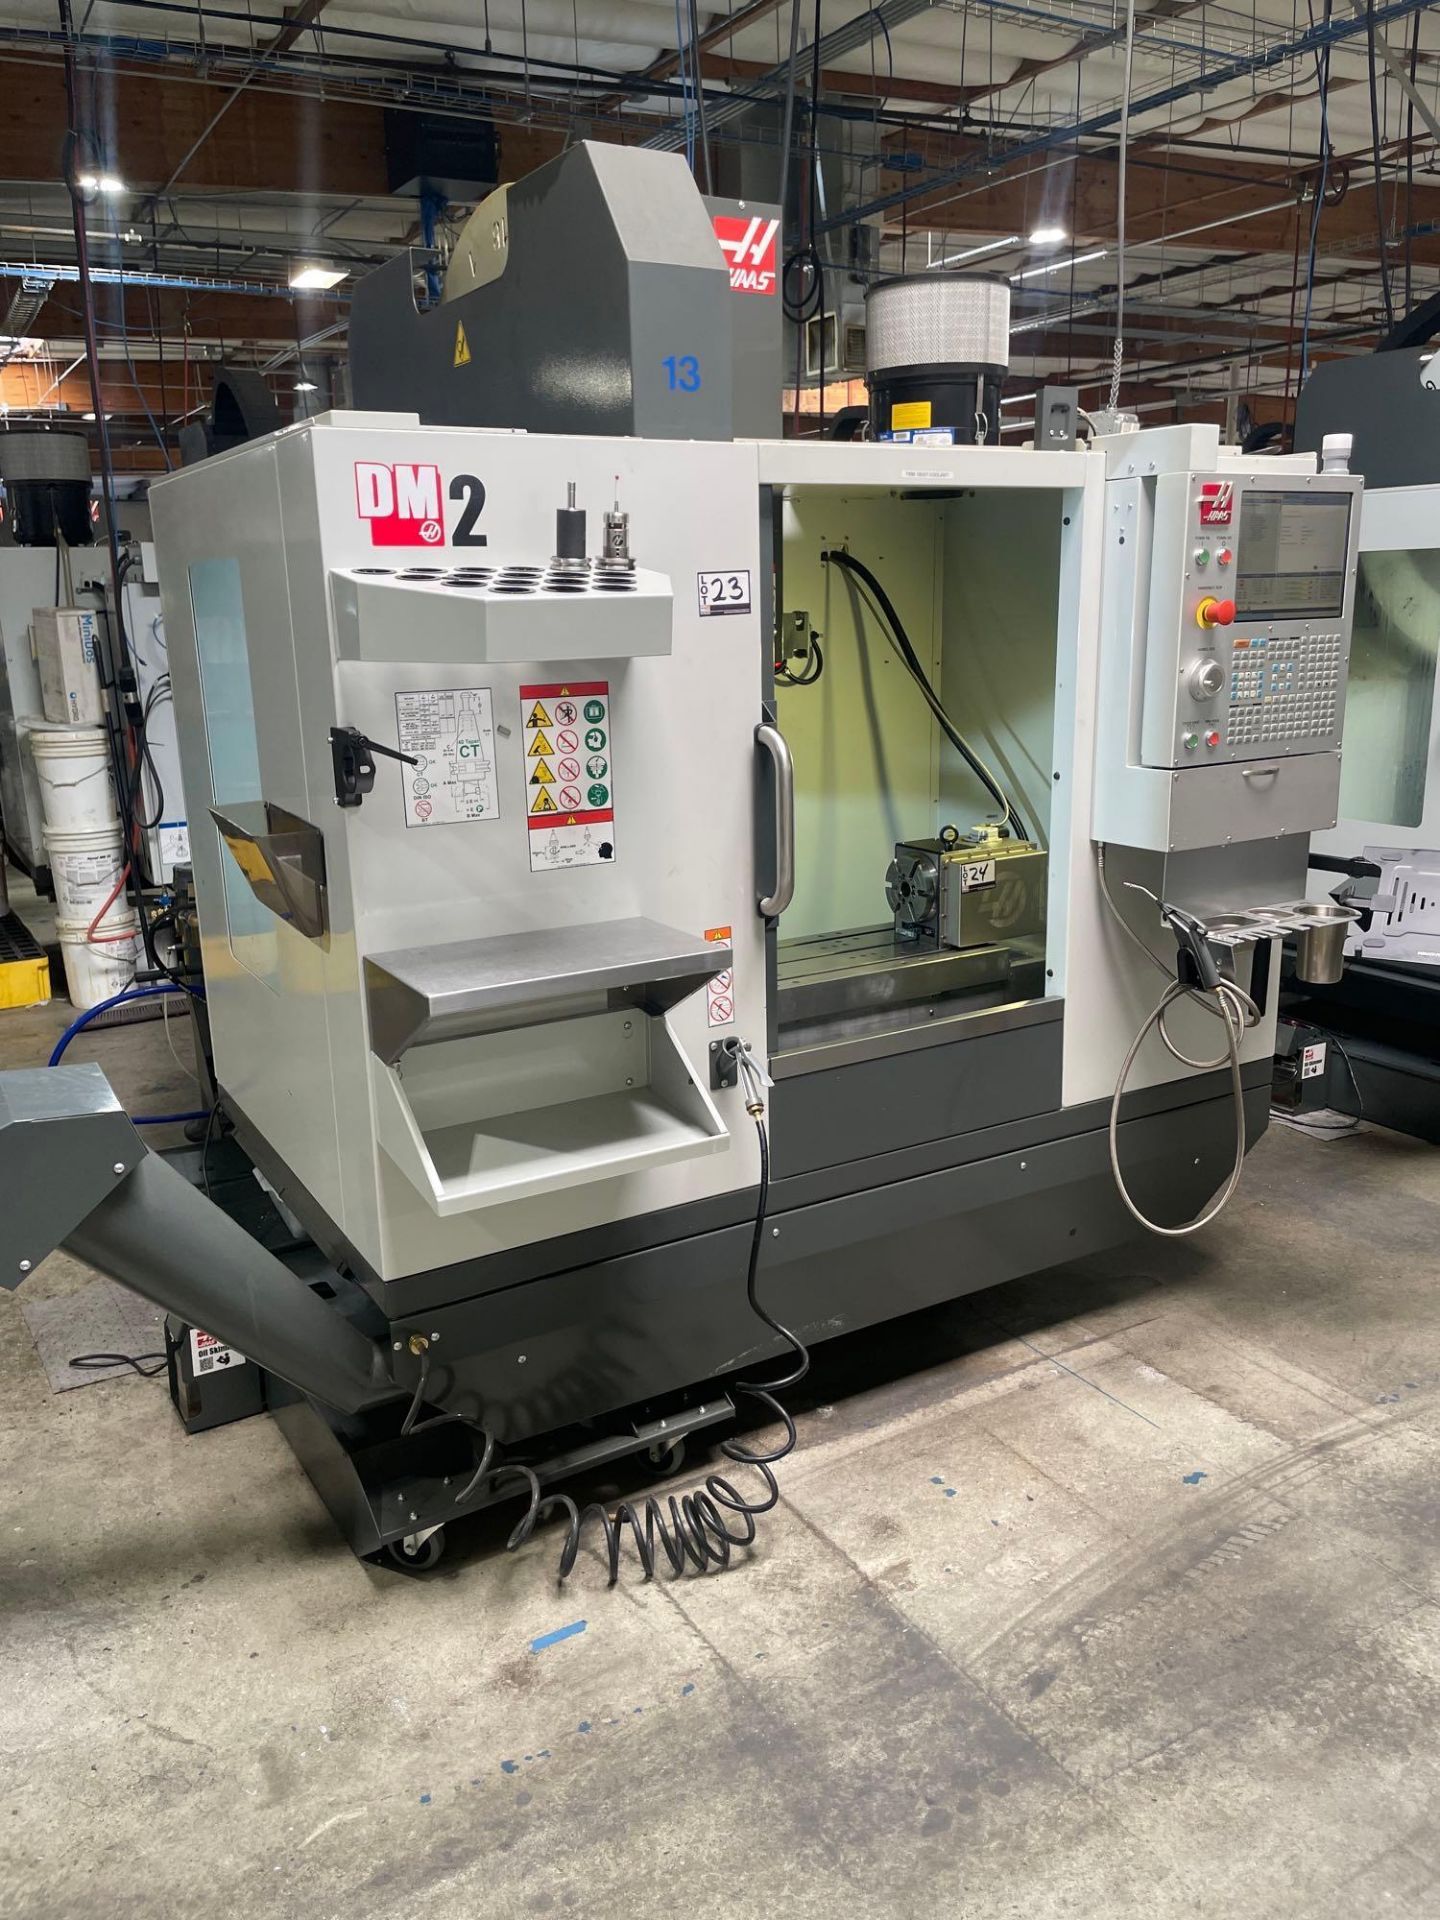 Haas DM-2, 28” x 16” x 15.5” Travels, CT 40, 18+1 SMTC, CTS, WIPS, as New as 2021 - Image 3 of 13